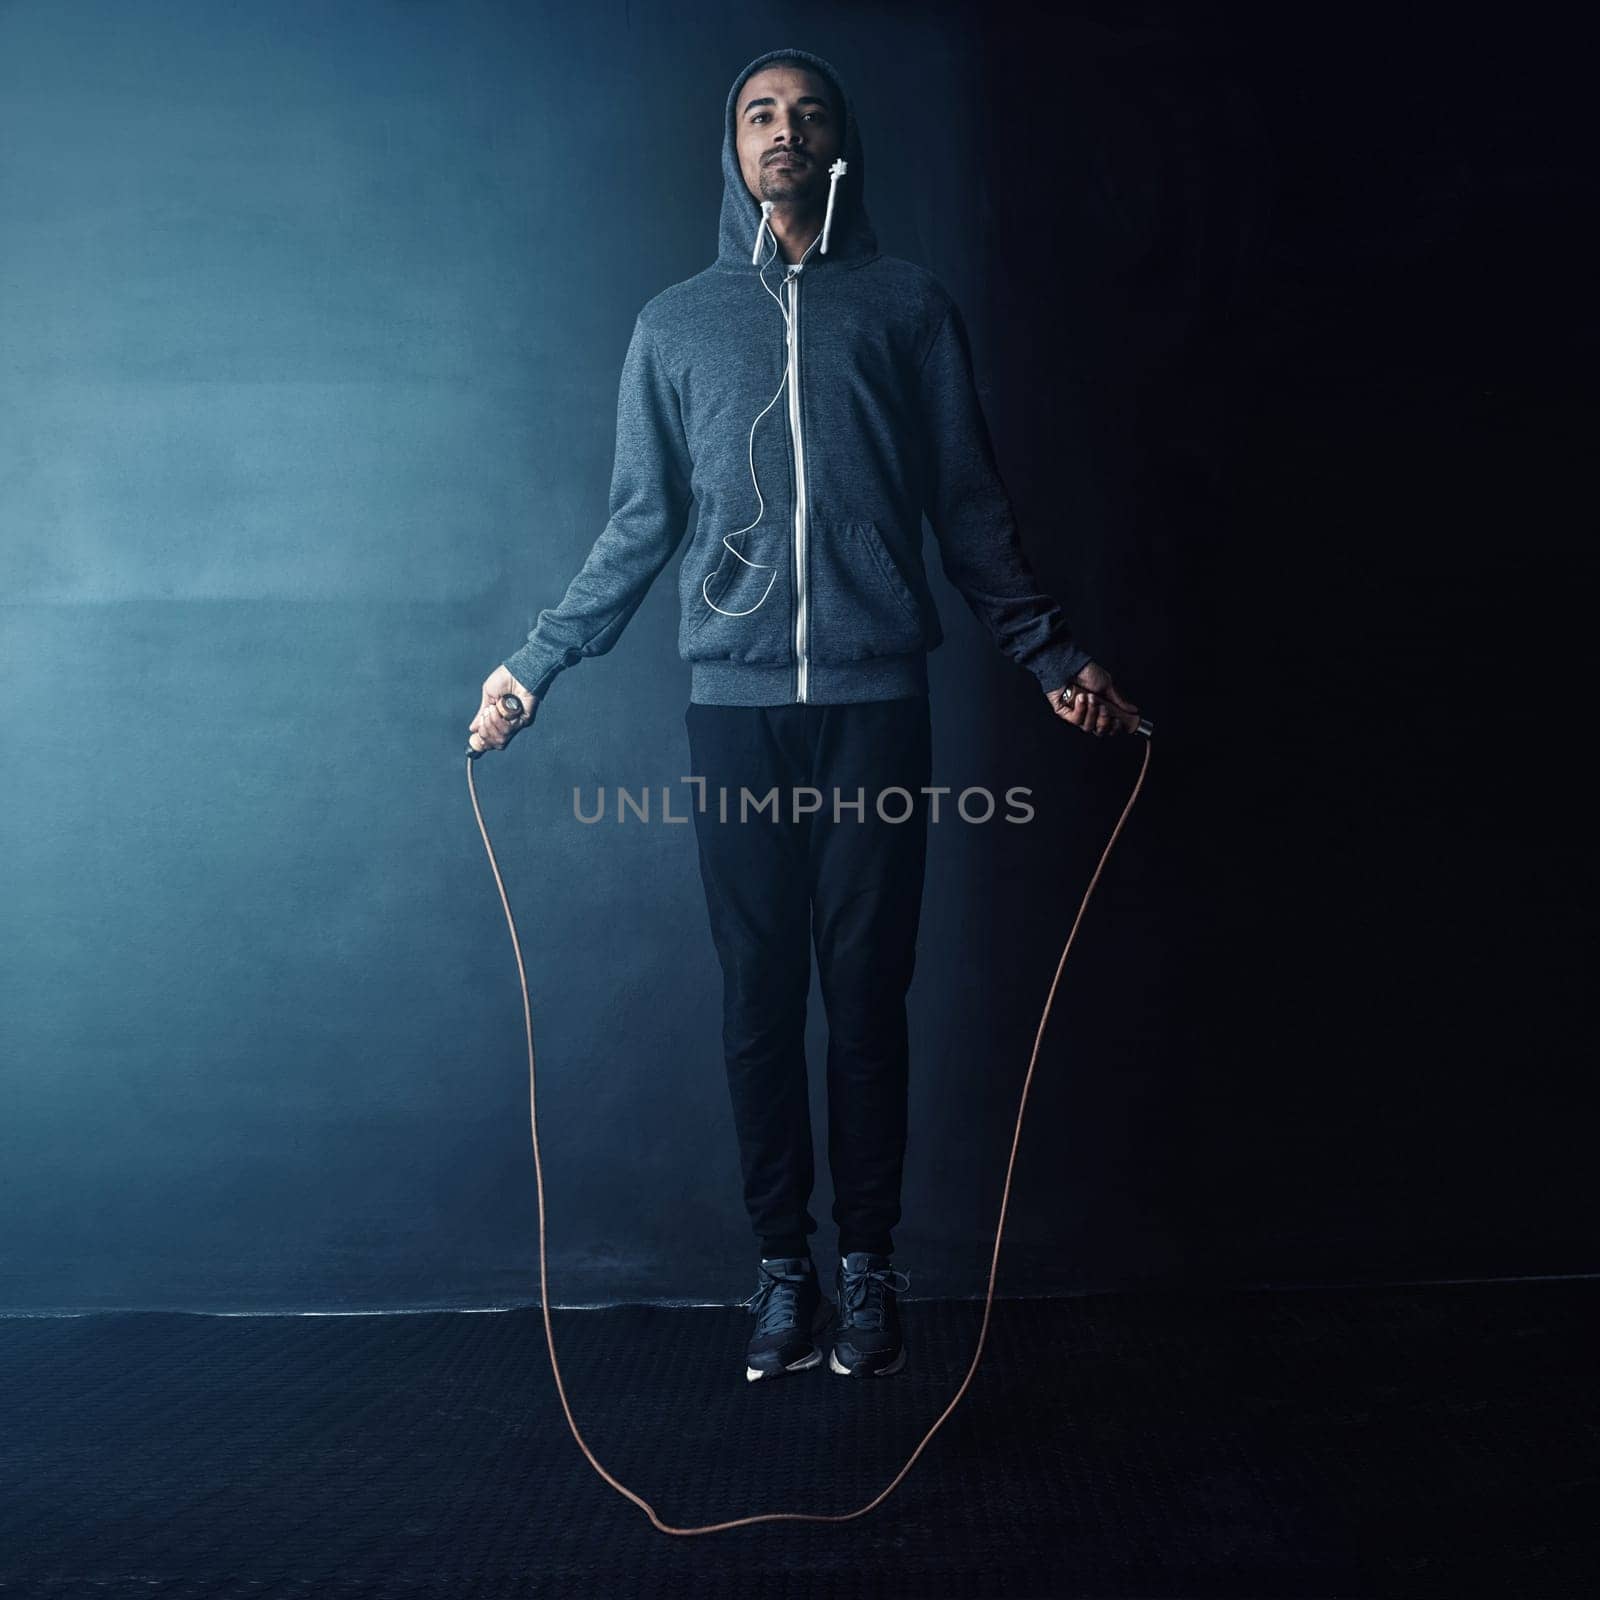 Skipping his way to fitness. Studio shot of a young man skipping against a dark background